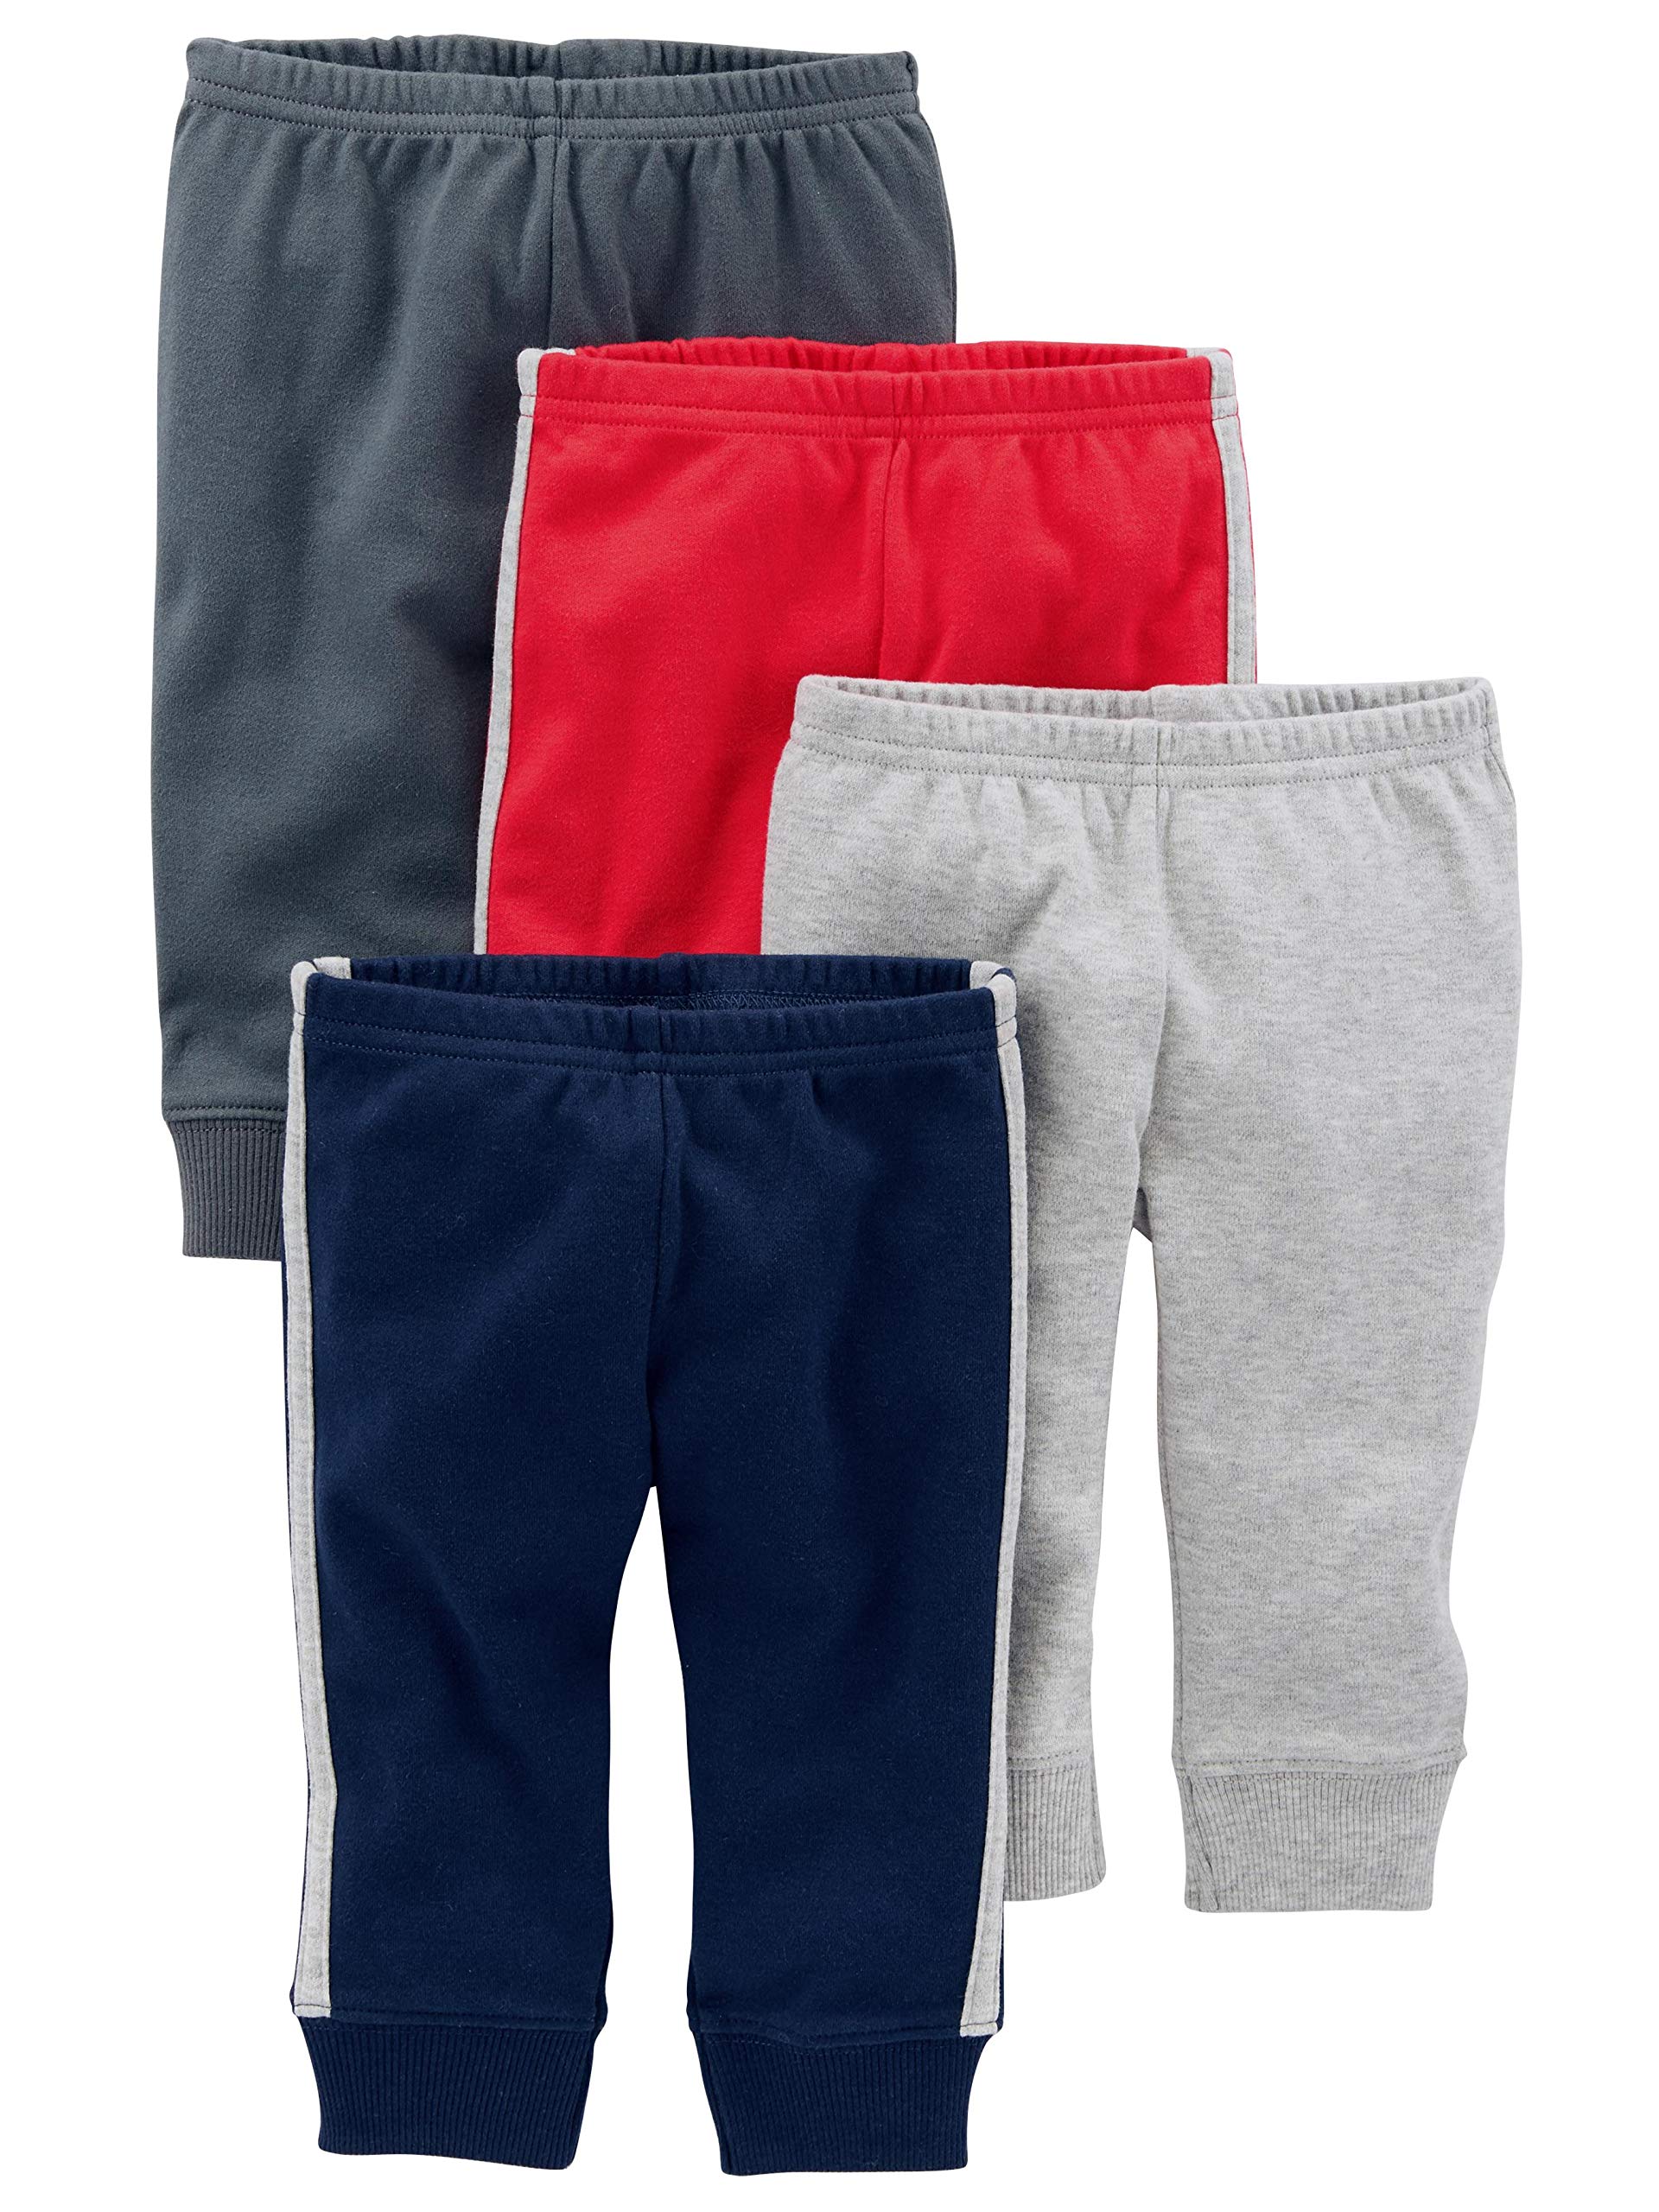 Simple Joys by Carter's Baby Boys' Pant, Pack of 4